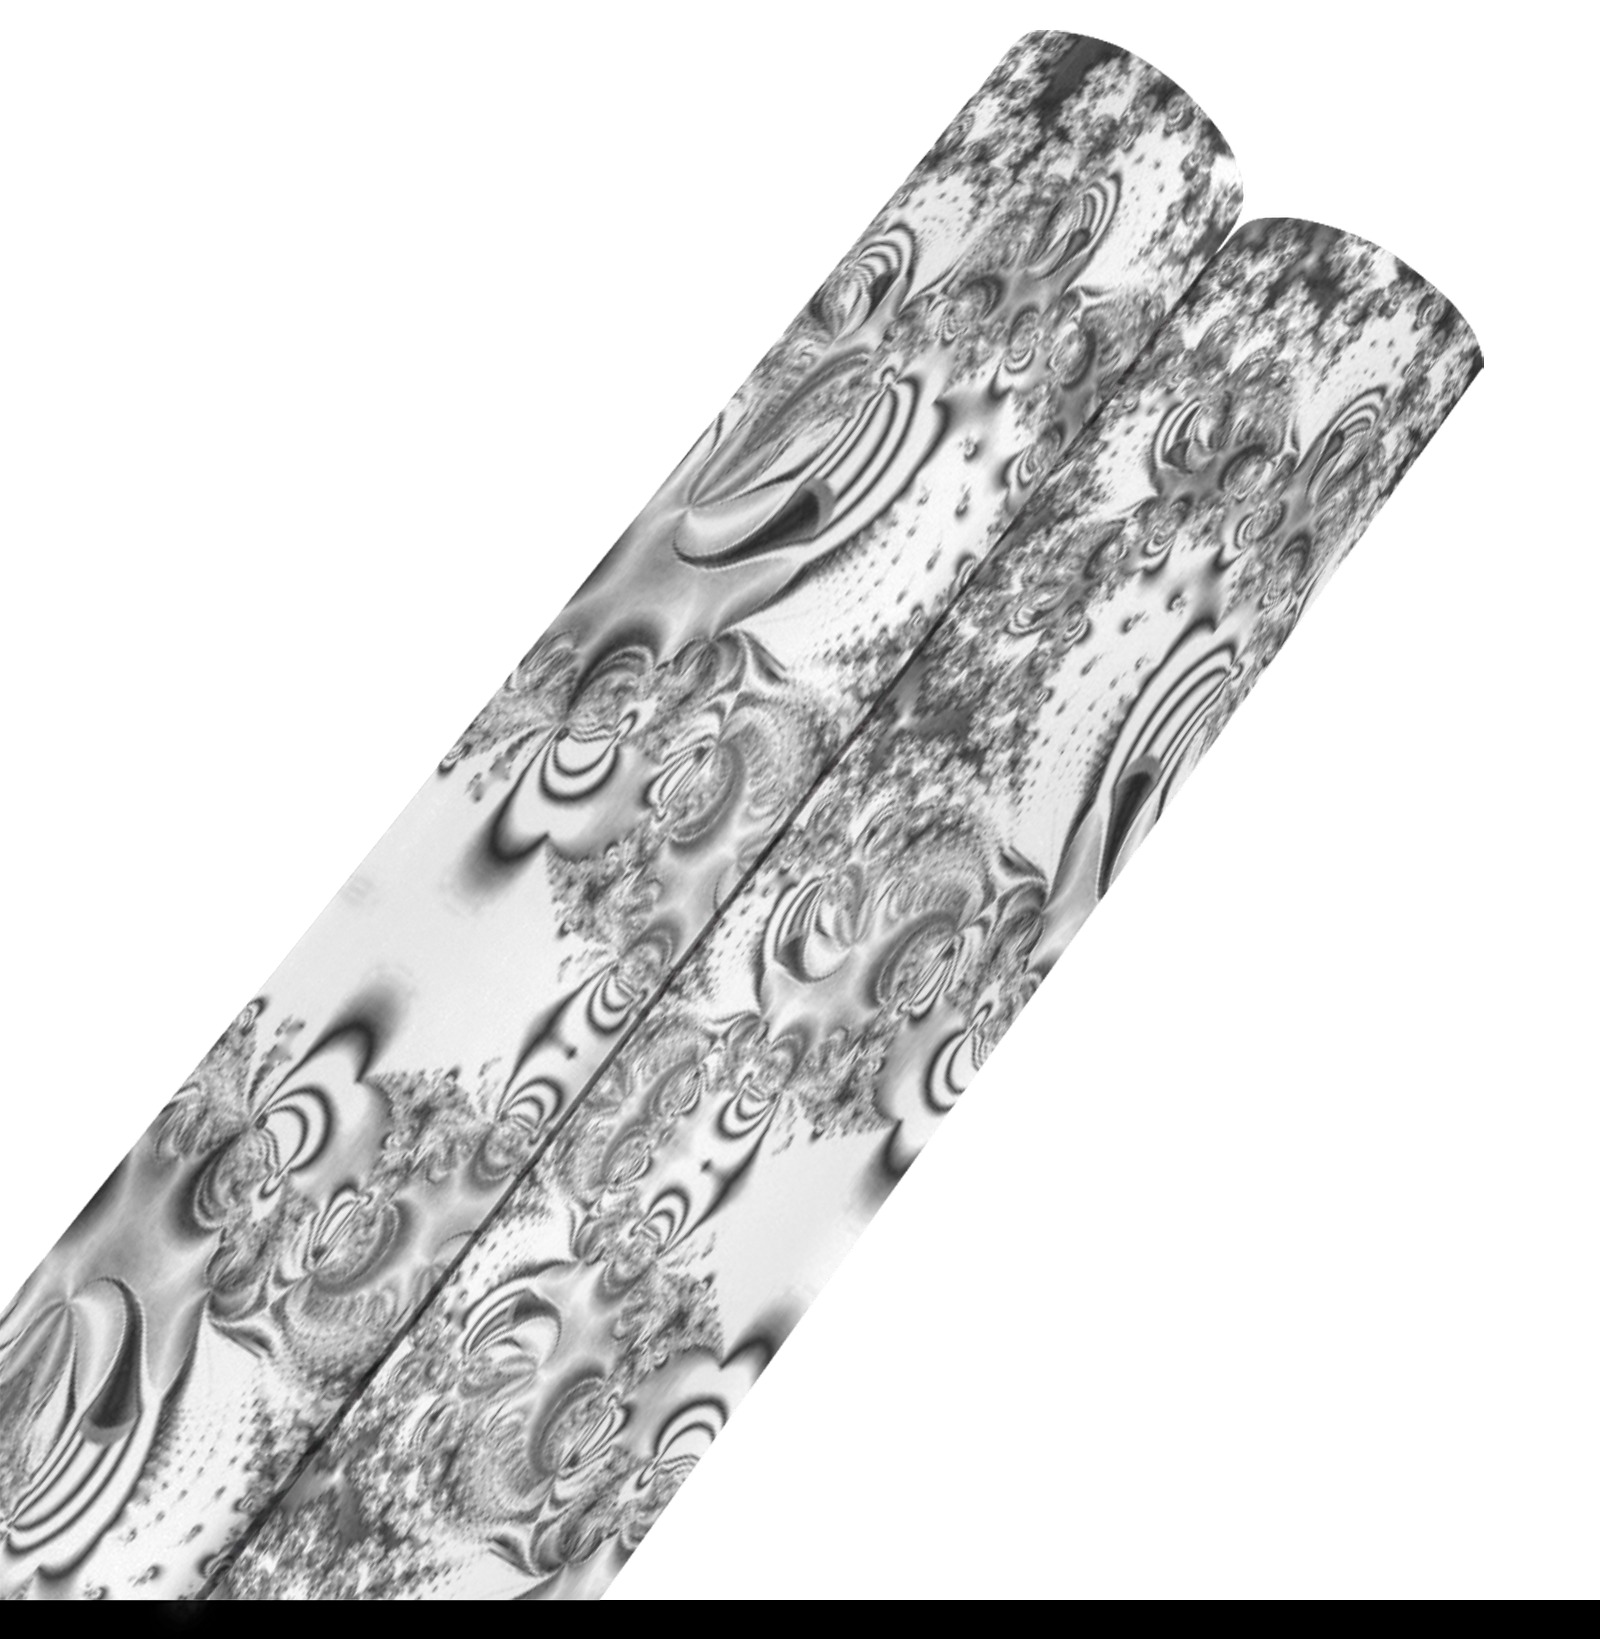 Silver Linings Frost Fractal Gift Wrapping Paper 58"x 23" (2 Rolls)